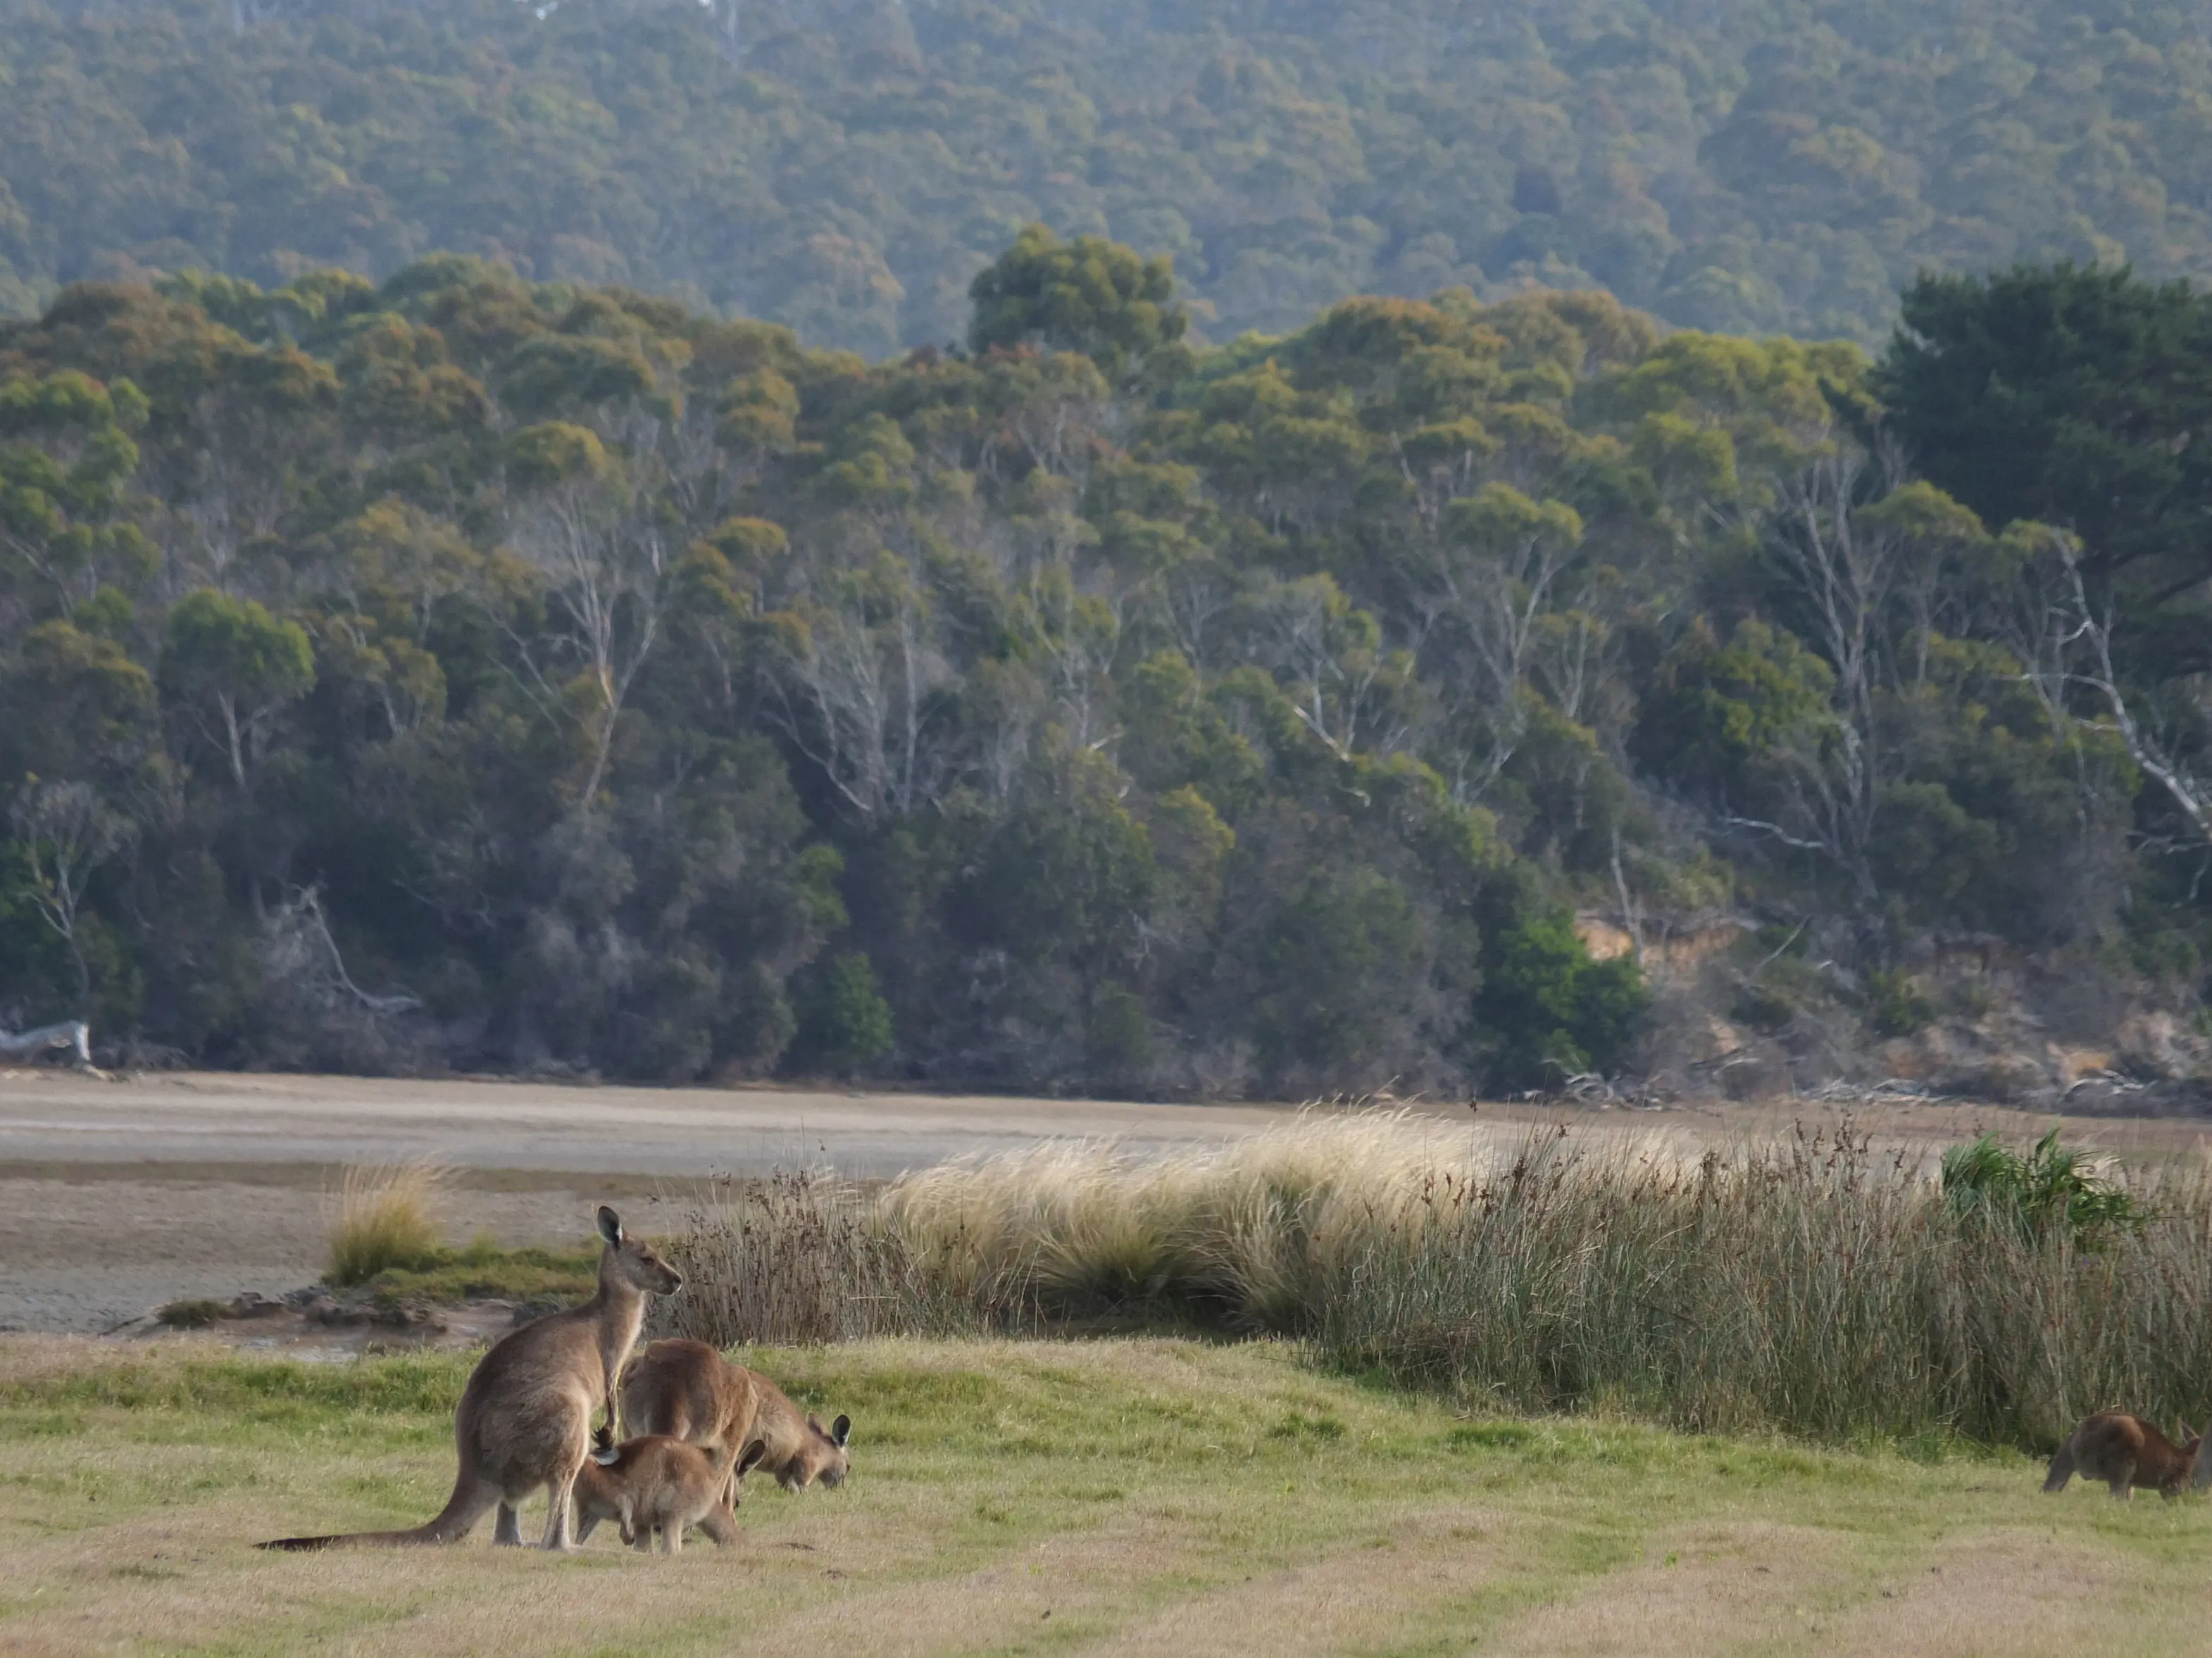 Three kangaroos in the flat grass at Narawntapu National Park, rainforest in the backdrop.